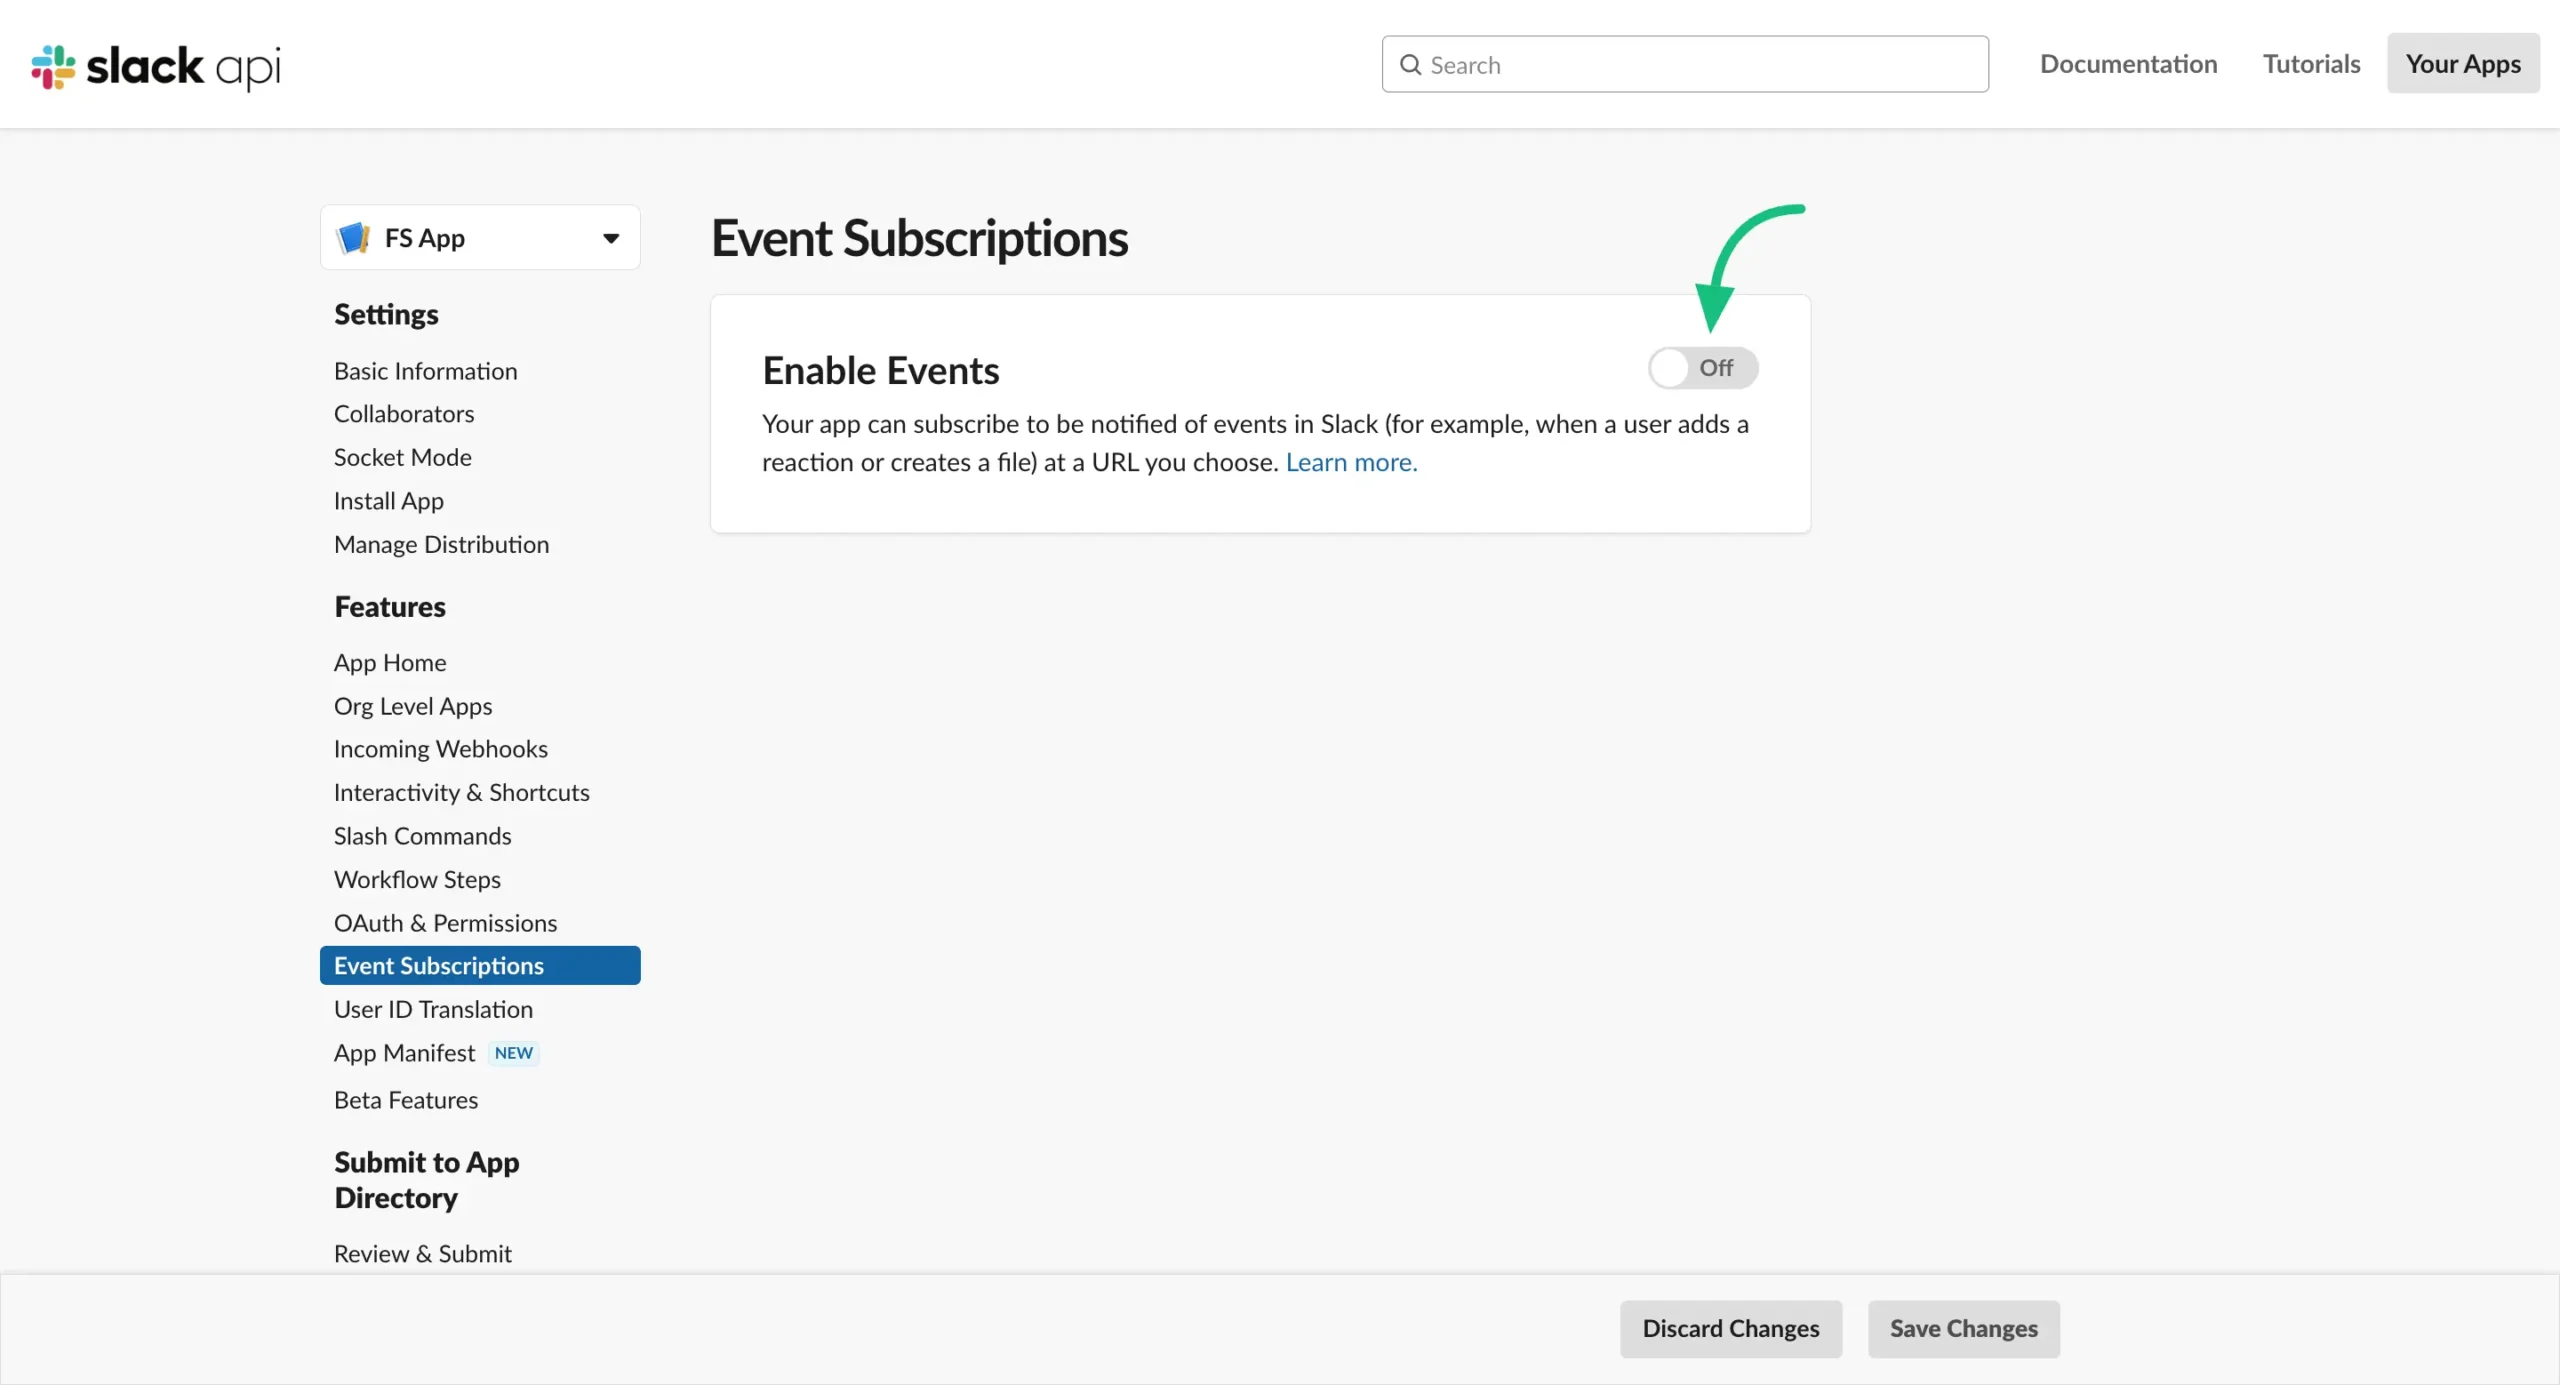 Enable events toggle